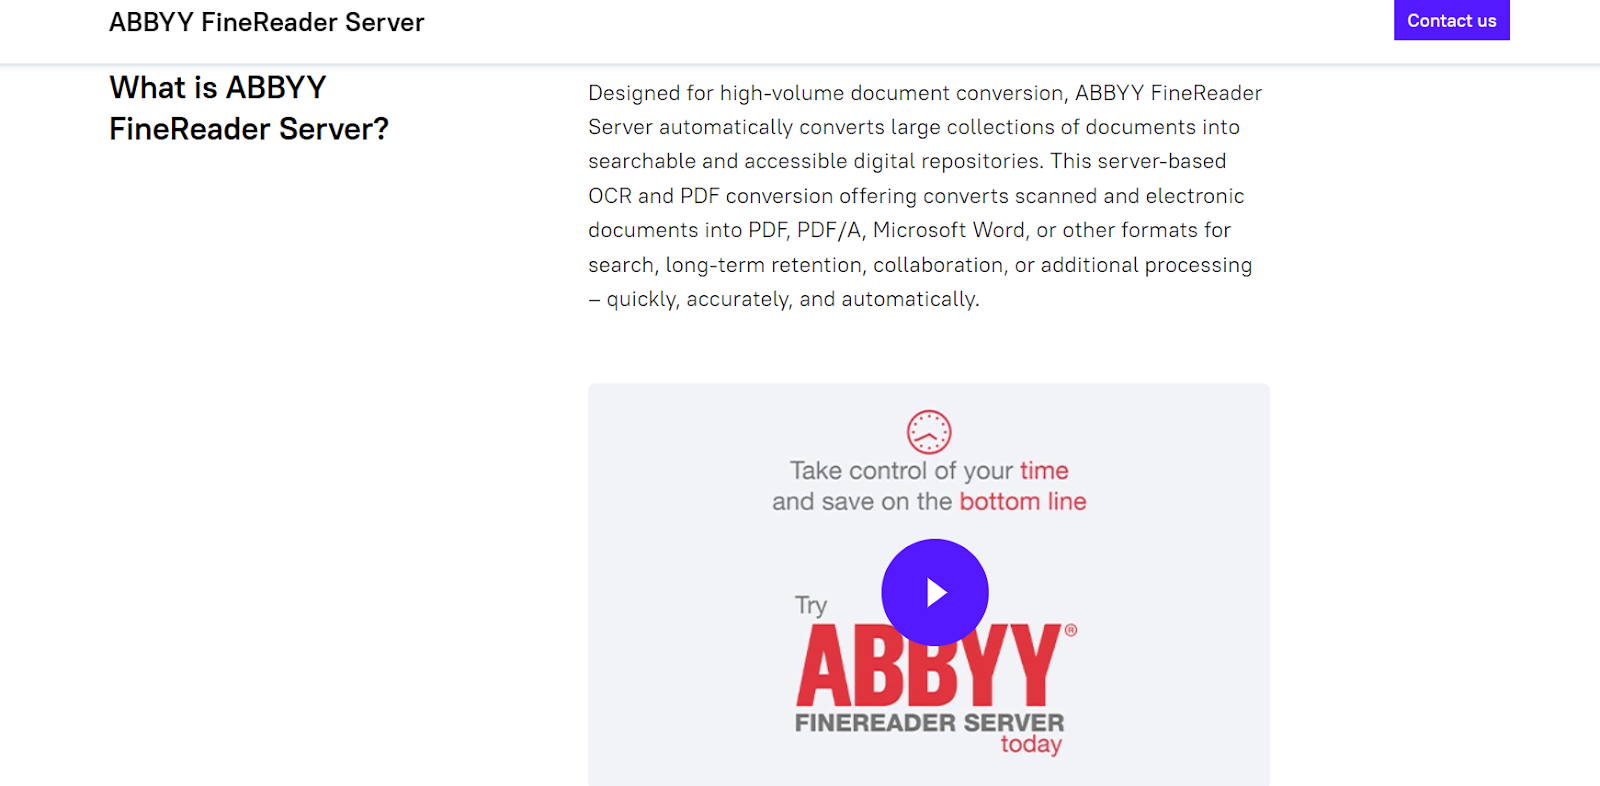 Overview: What Is ABBYY FineReader Server?